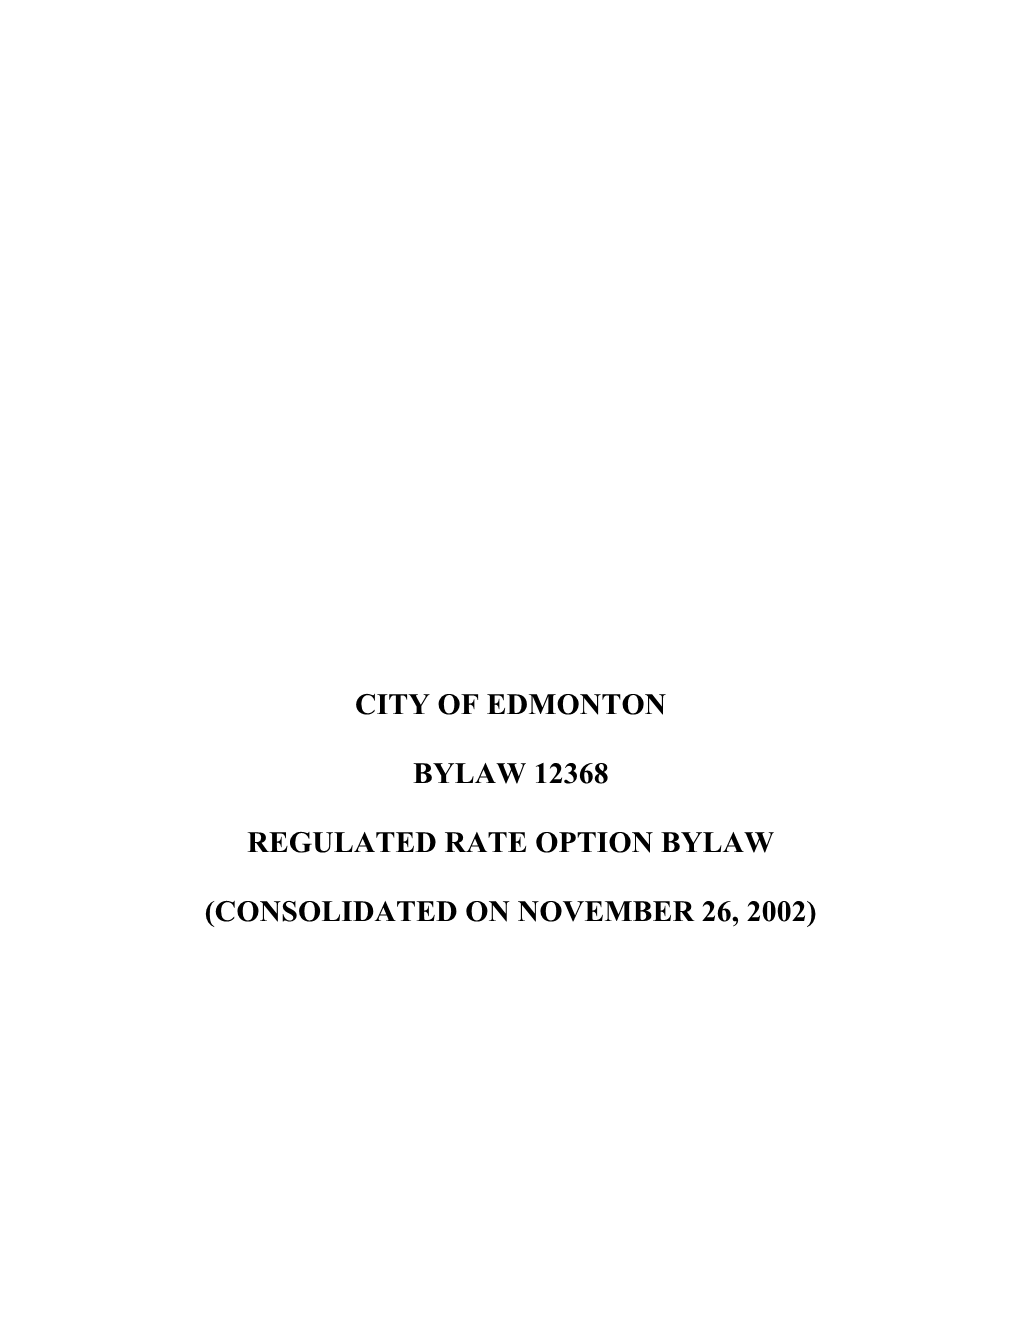 Regulated Rate Option Bylaw 12368